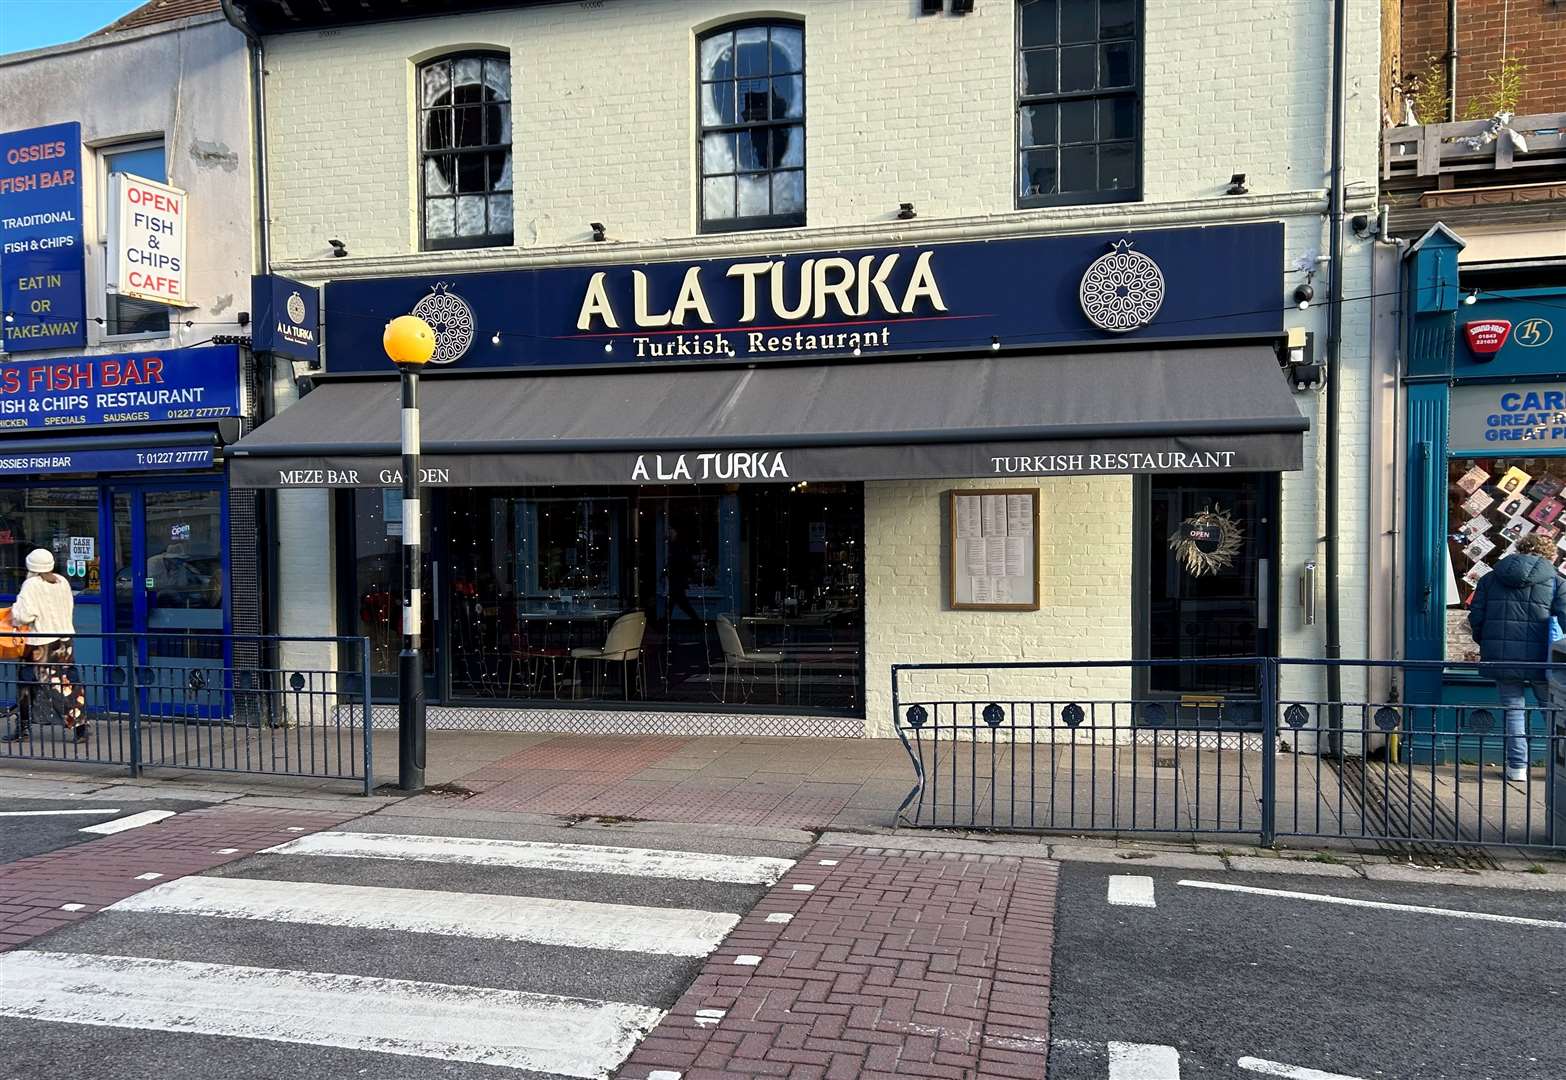 A La Turka in Whitstable high street was previously a Jobcentre and pub